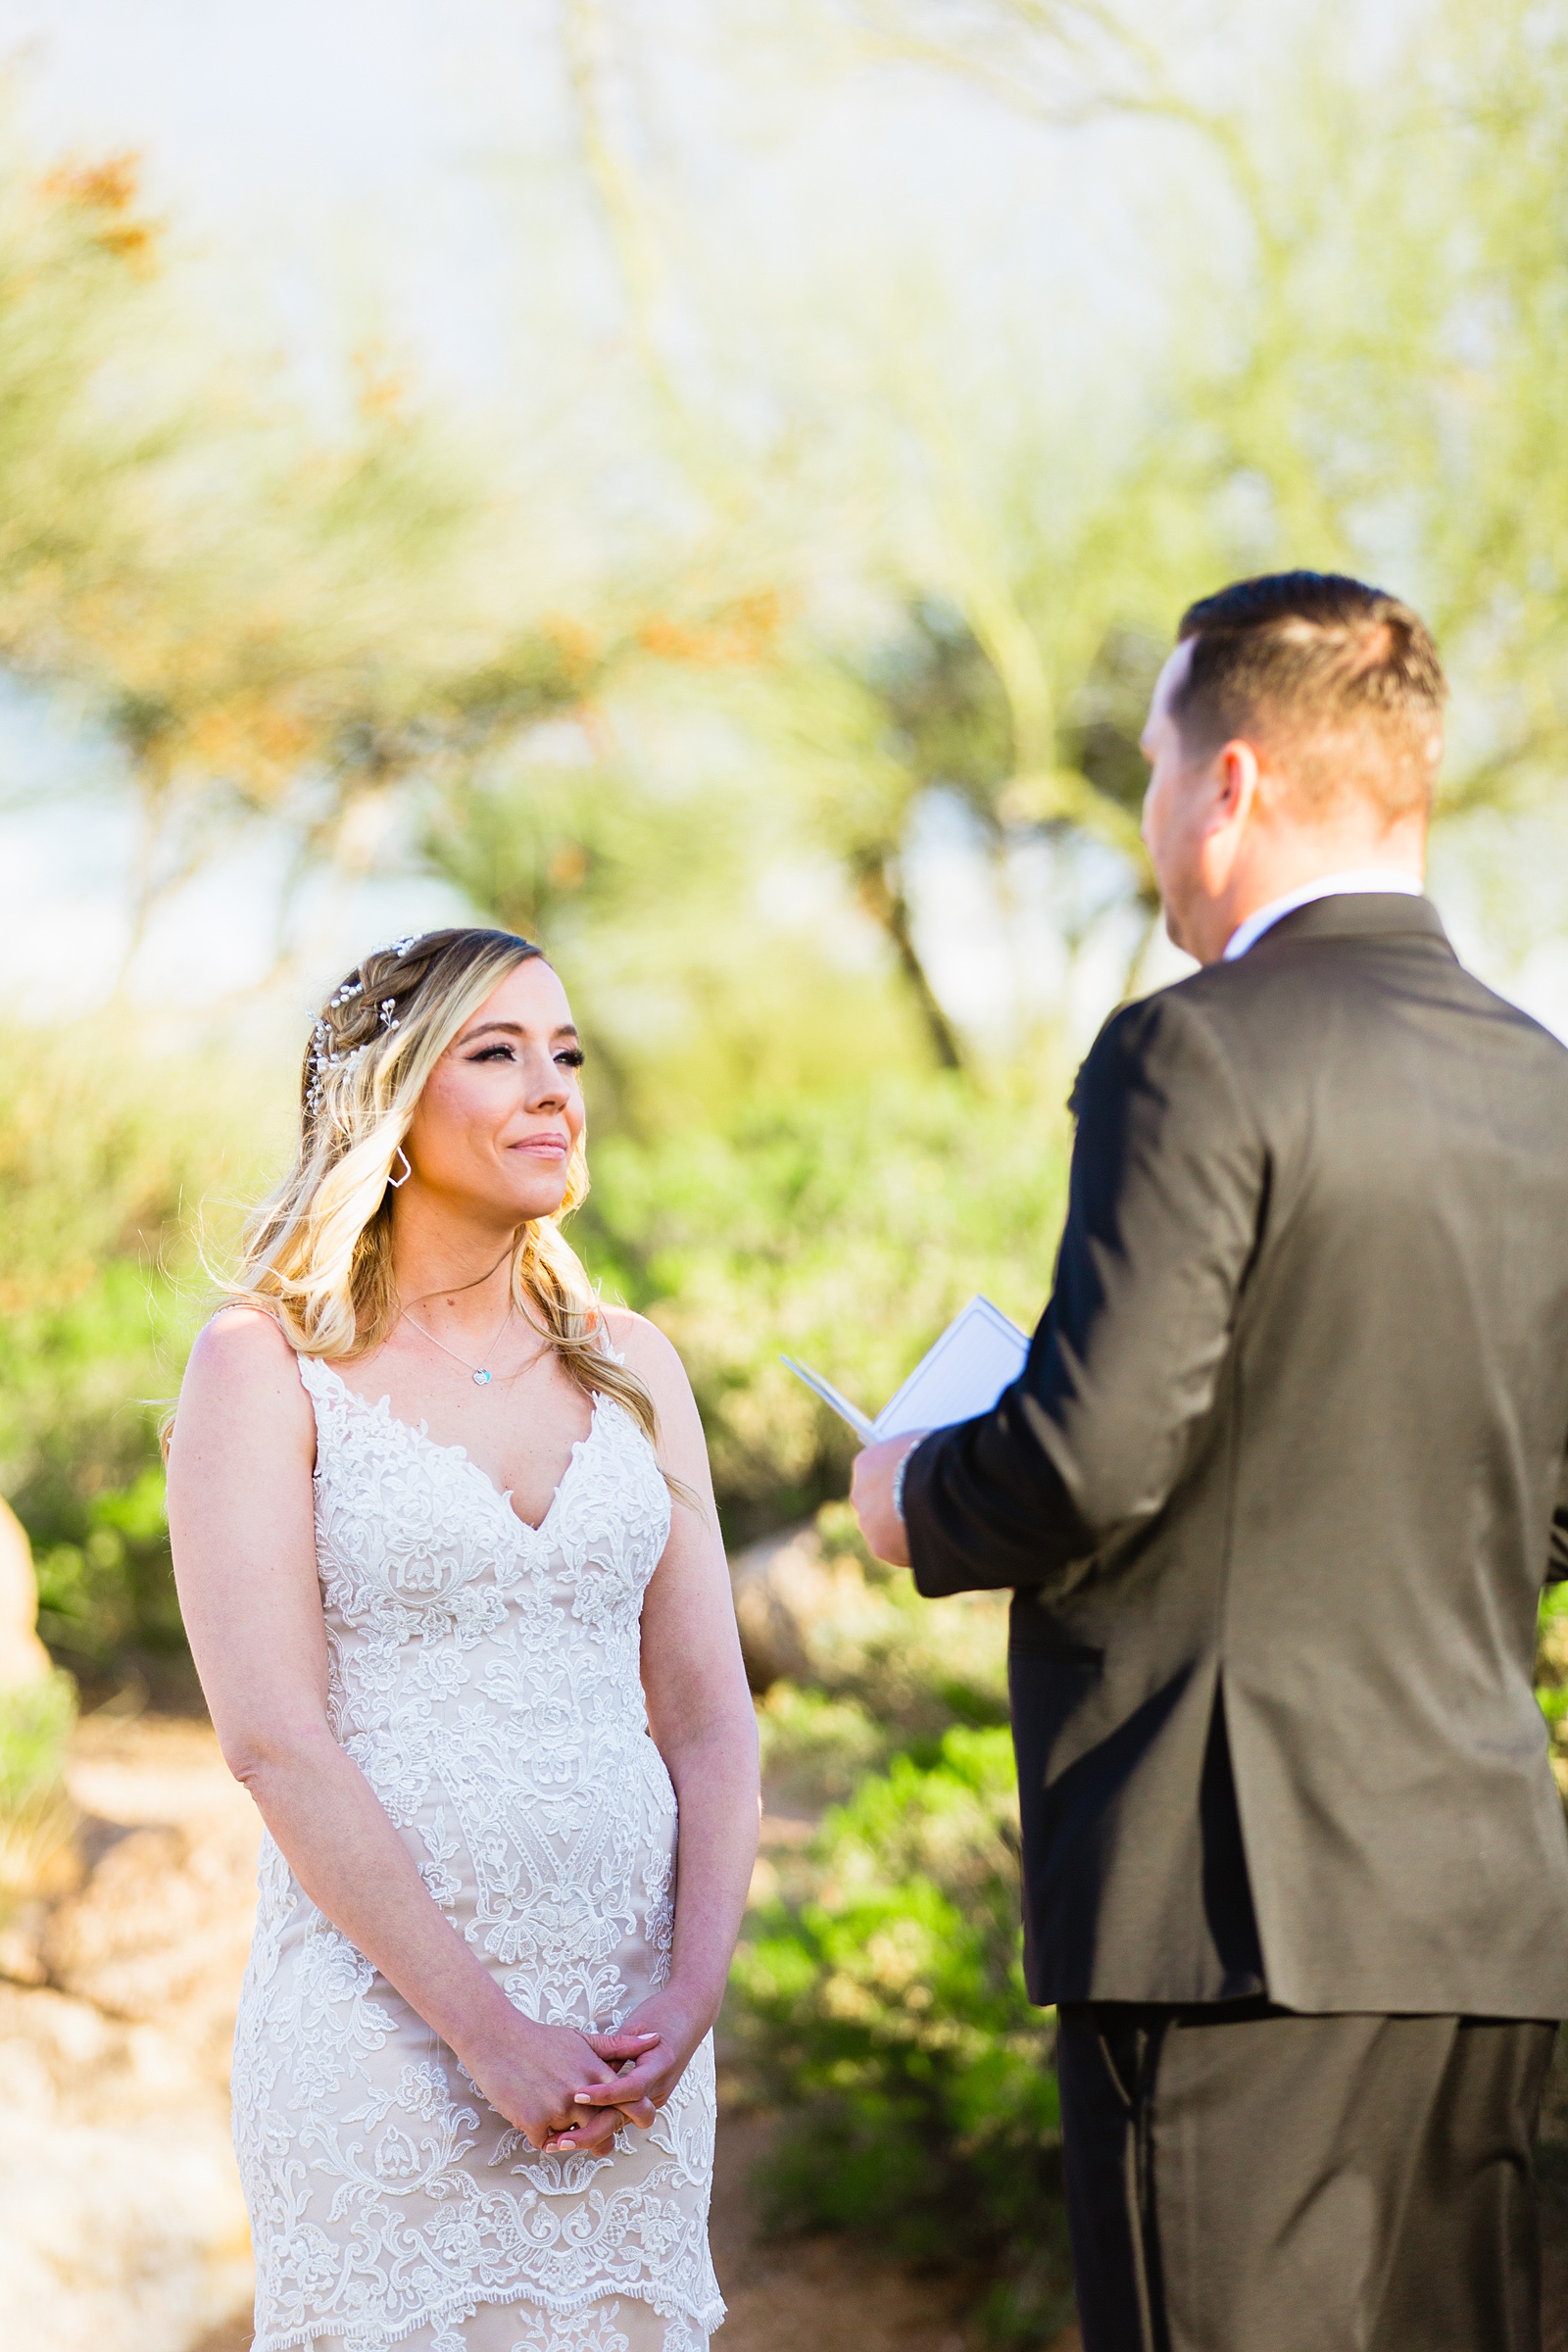 Bride and groom exchange vows during their Troon North wedding ceremony by Scottsdale wedding photographer PMA Photography.